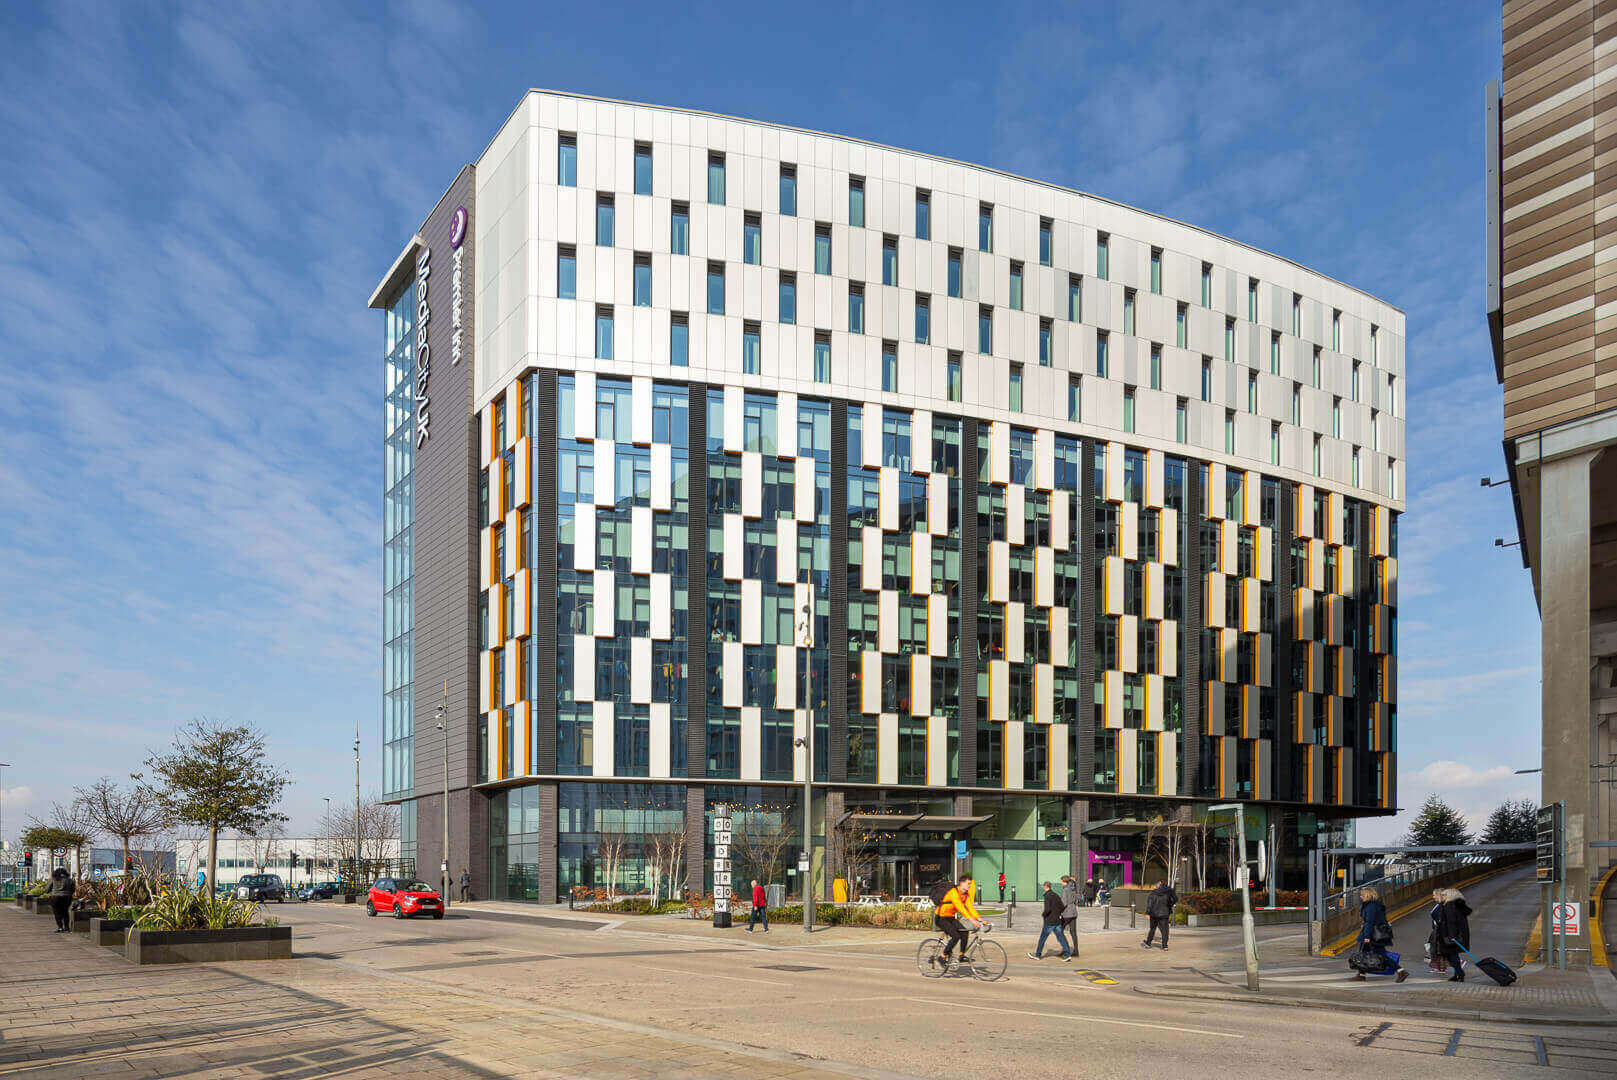 Commercial Architecture, Interiors & Aerial Photography - Tomorrow, MediaCityUK